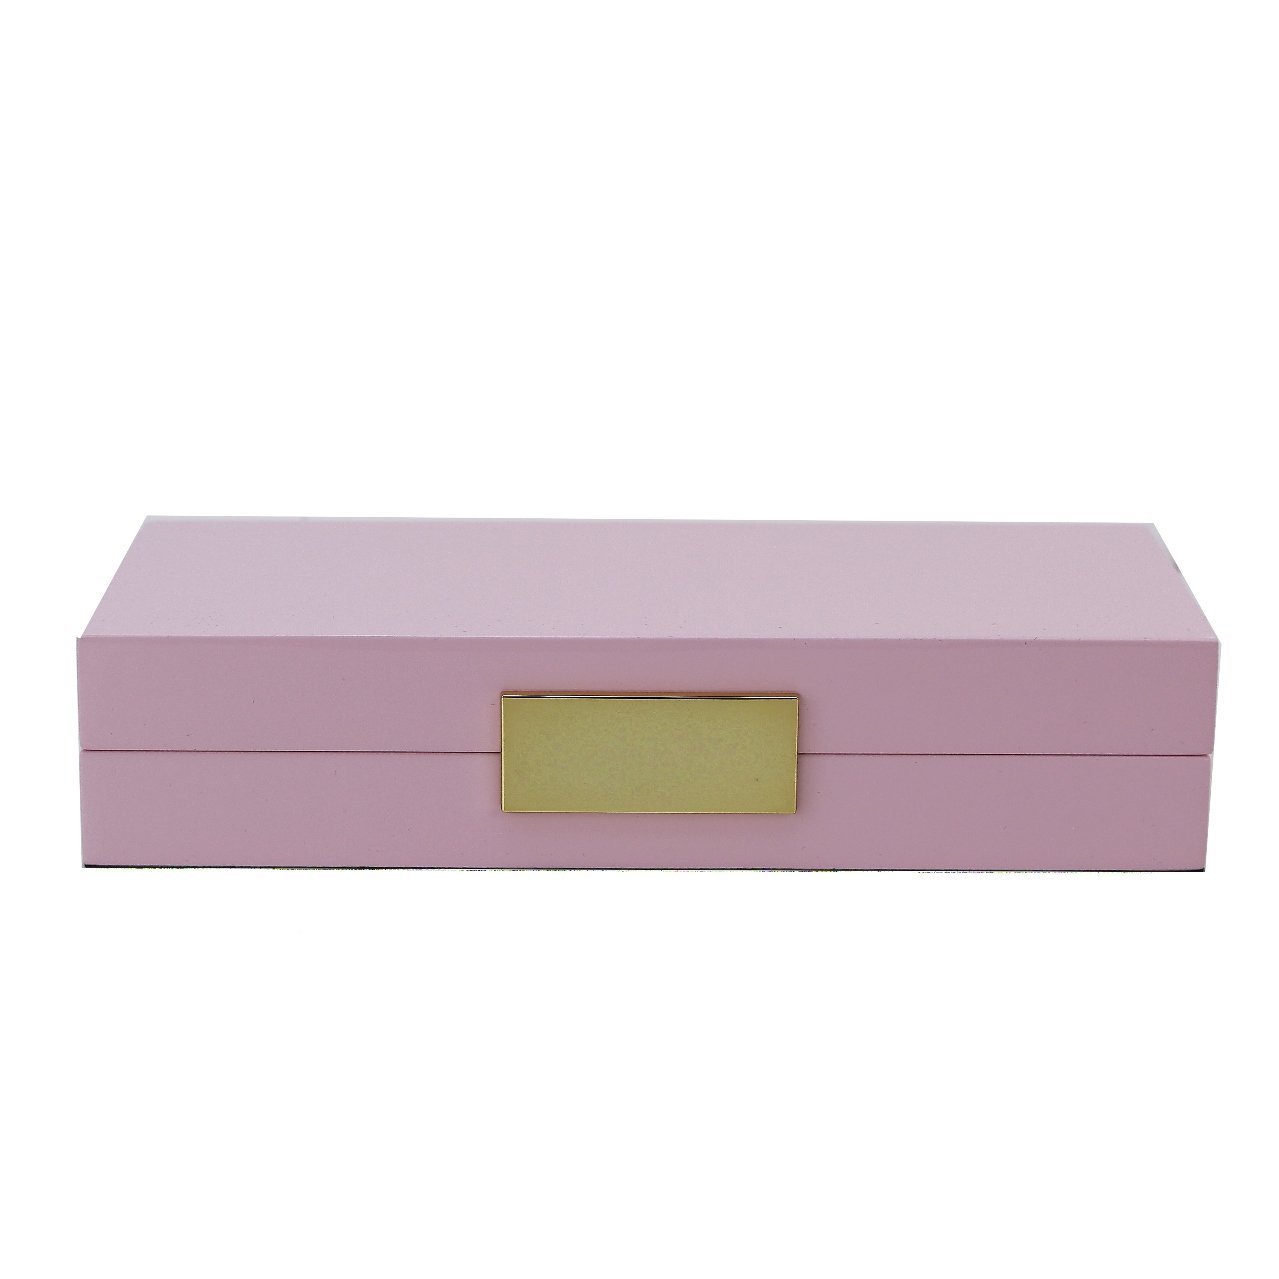 Pink Lacquer Box With Gold - Addison Ross Ltd UK